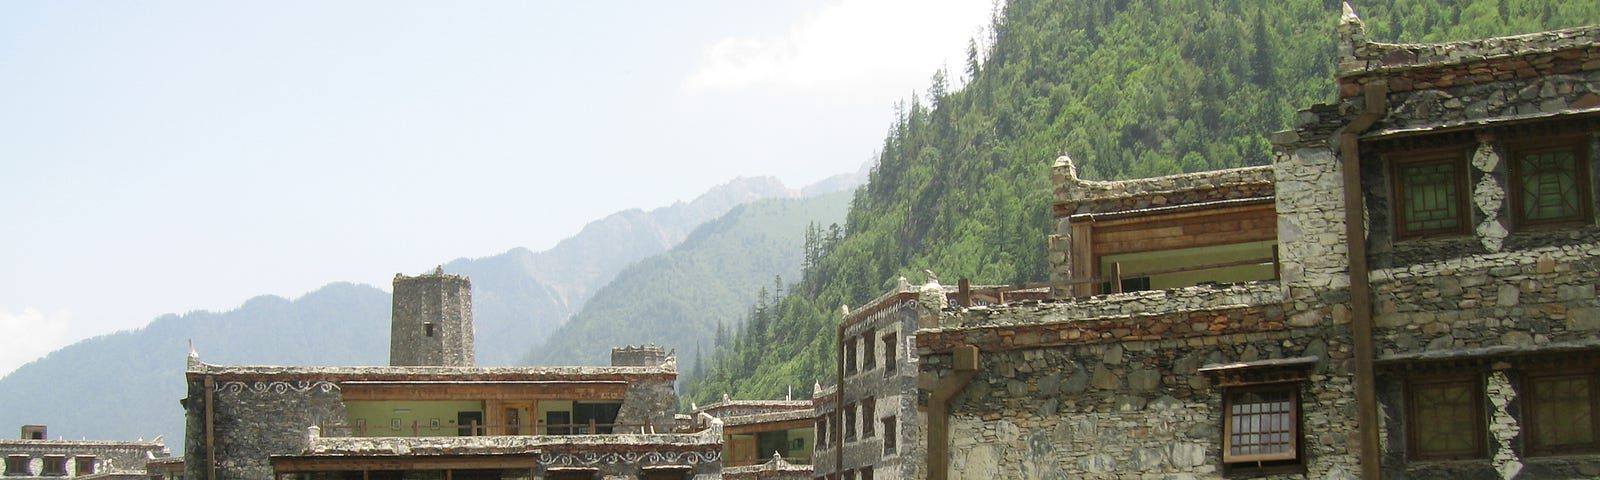 Buildings made of rocks with brown wooden trims on a green hill with mountain ranges in the background.